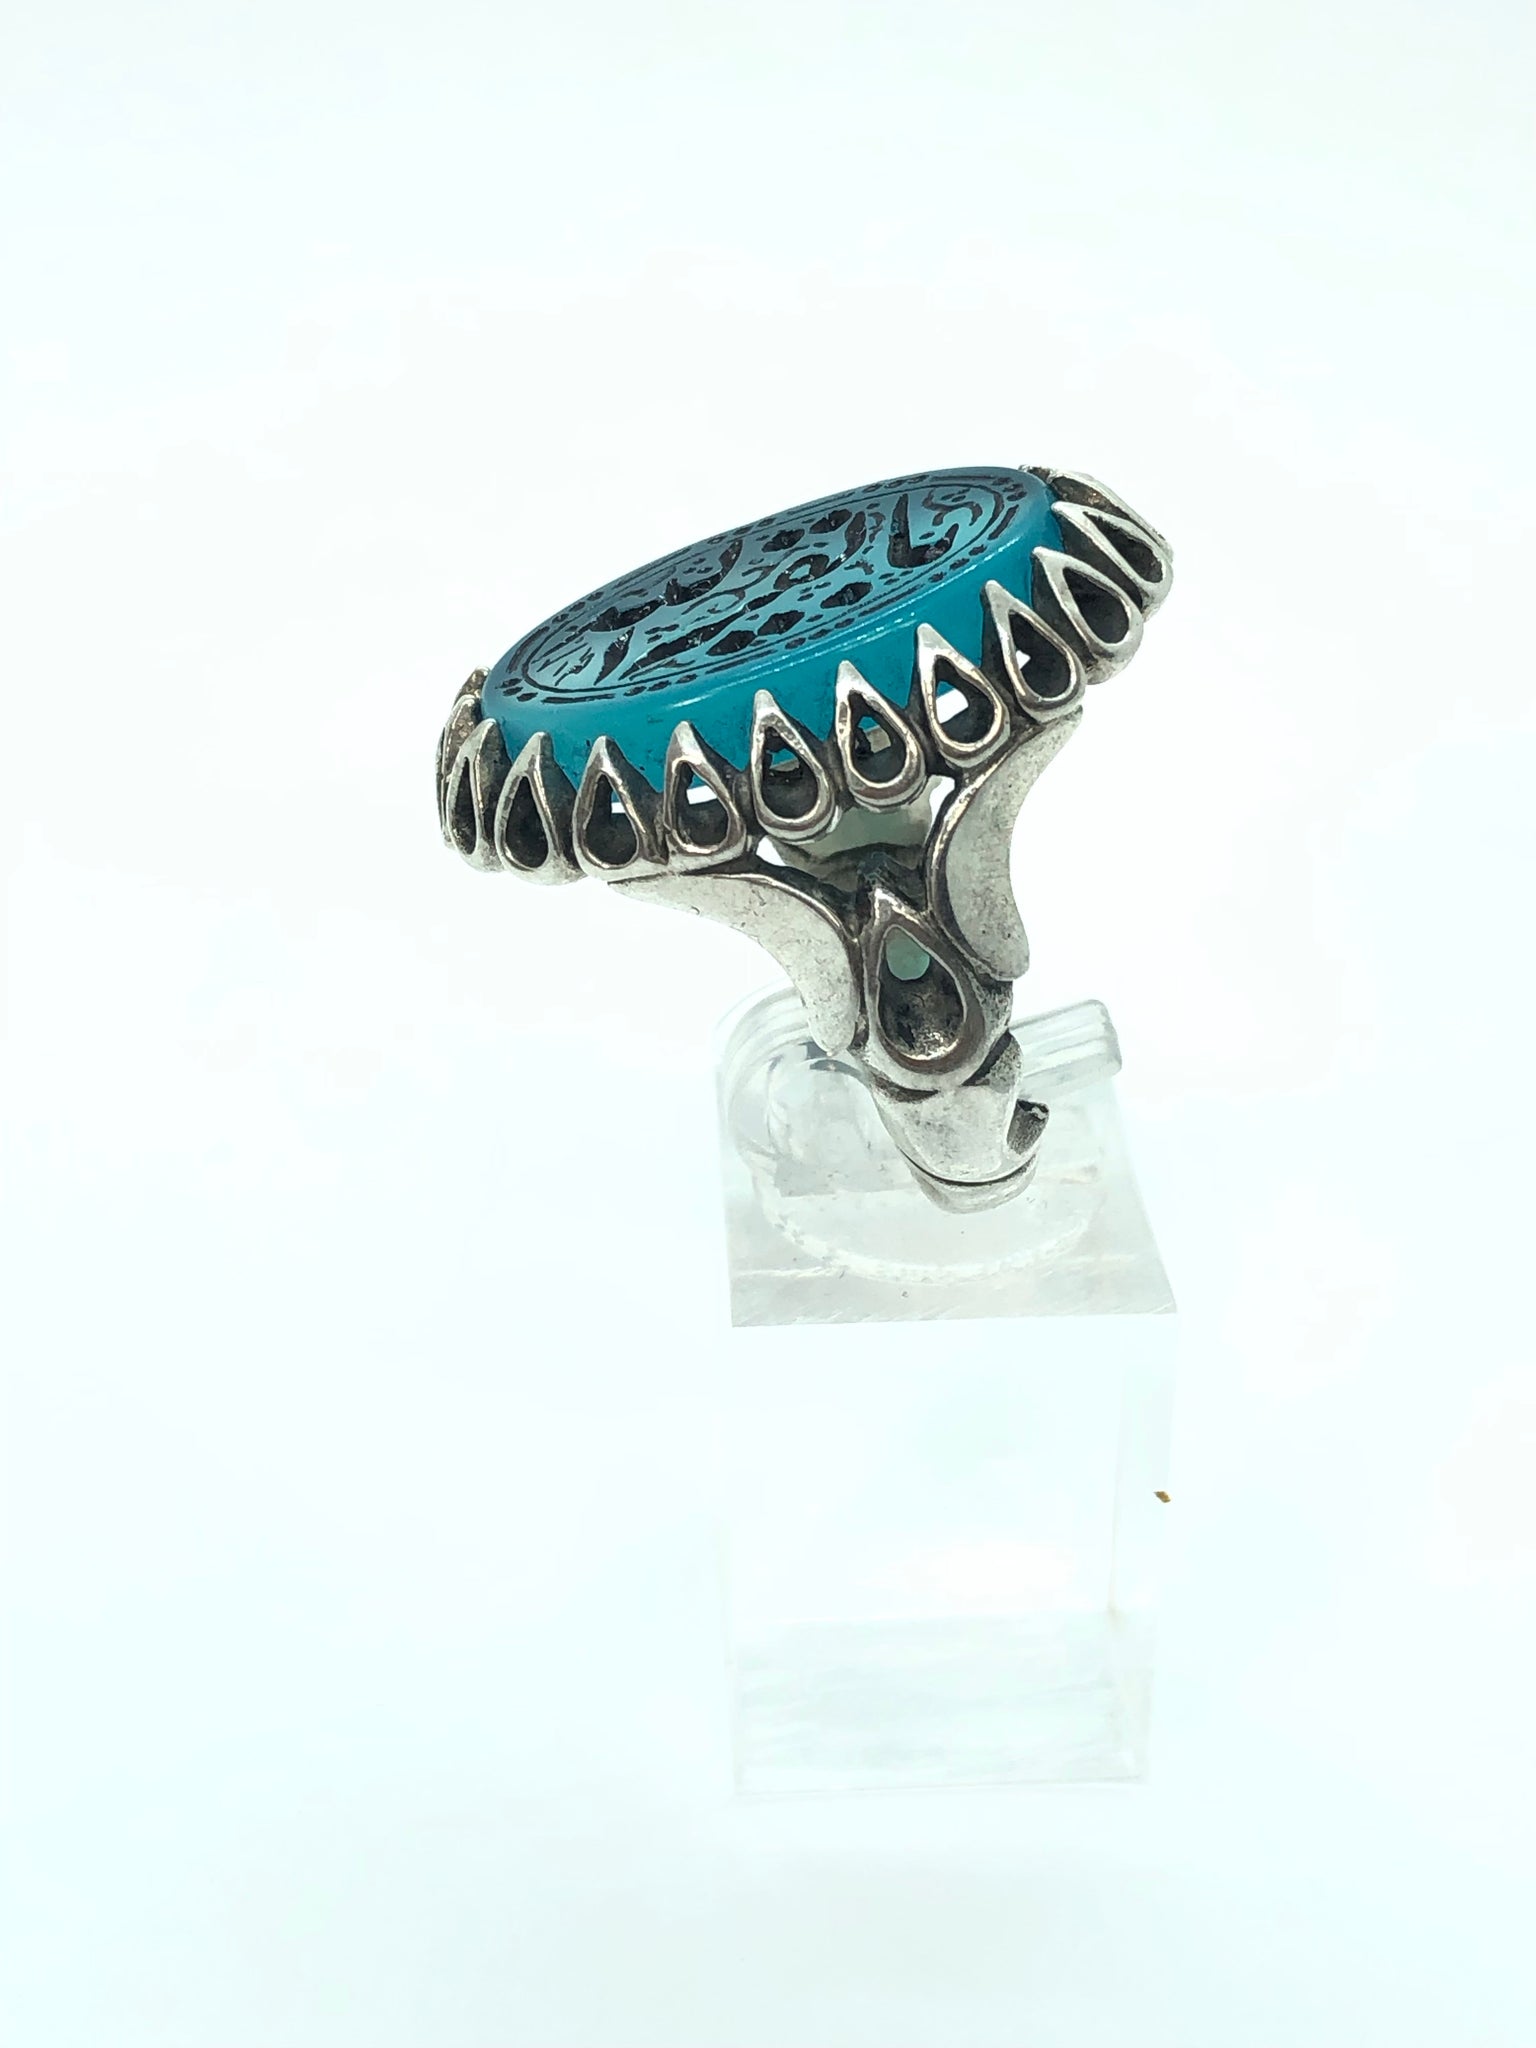 Blue Agheegh(agate) w/ religious calligraphy - Behesht Rings